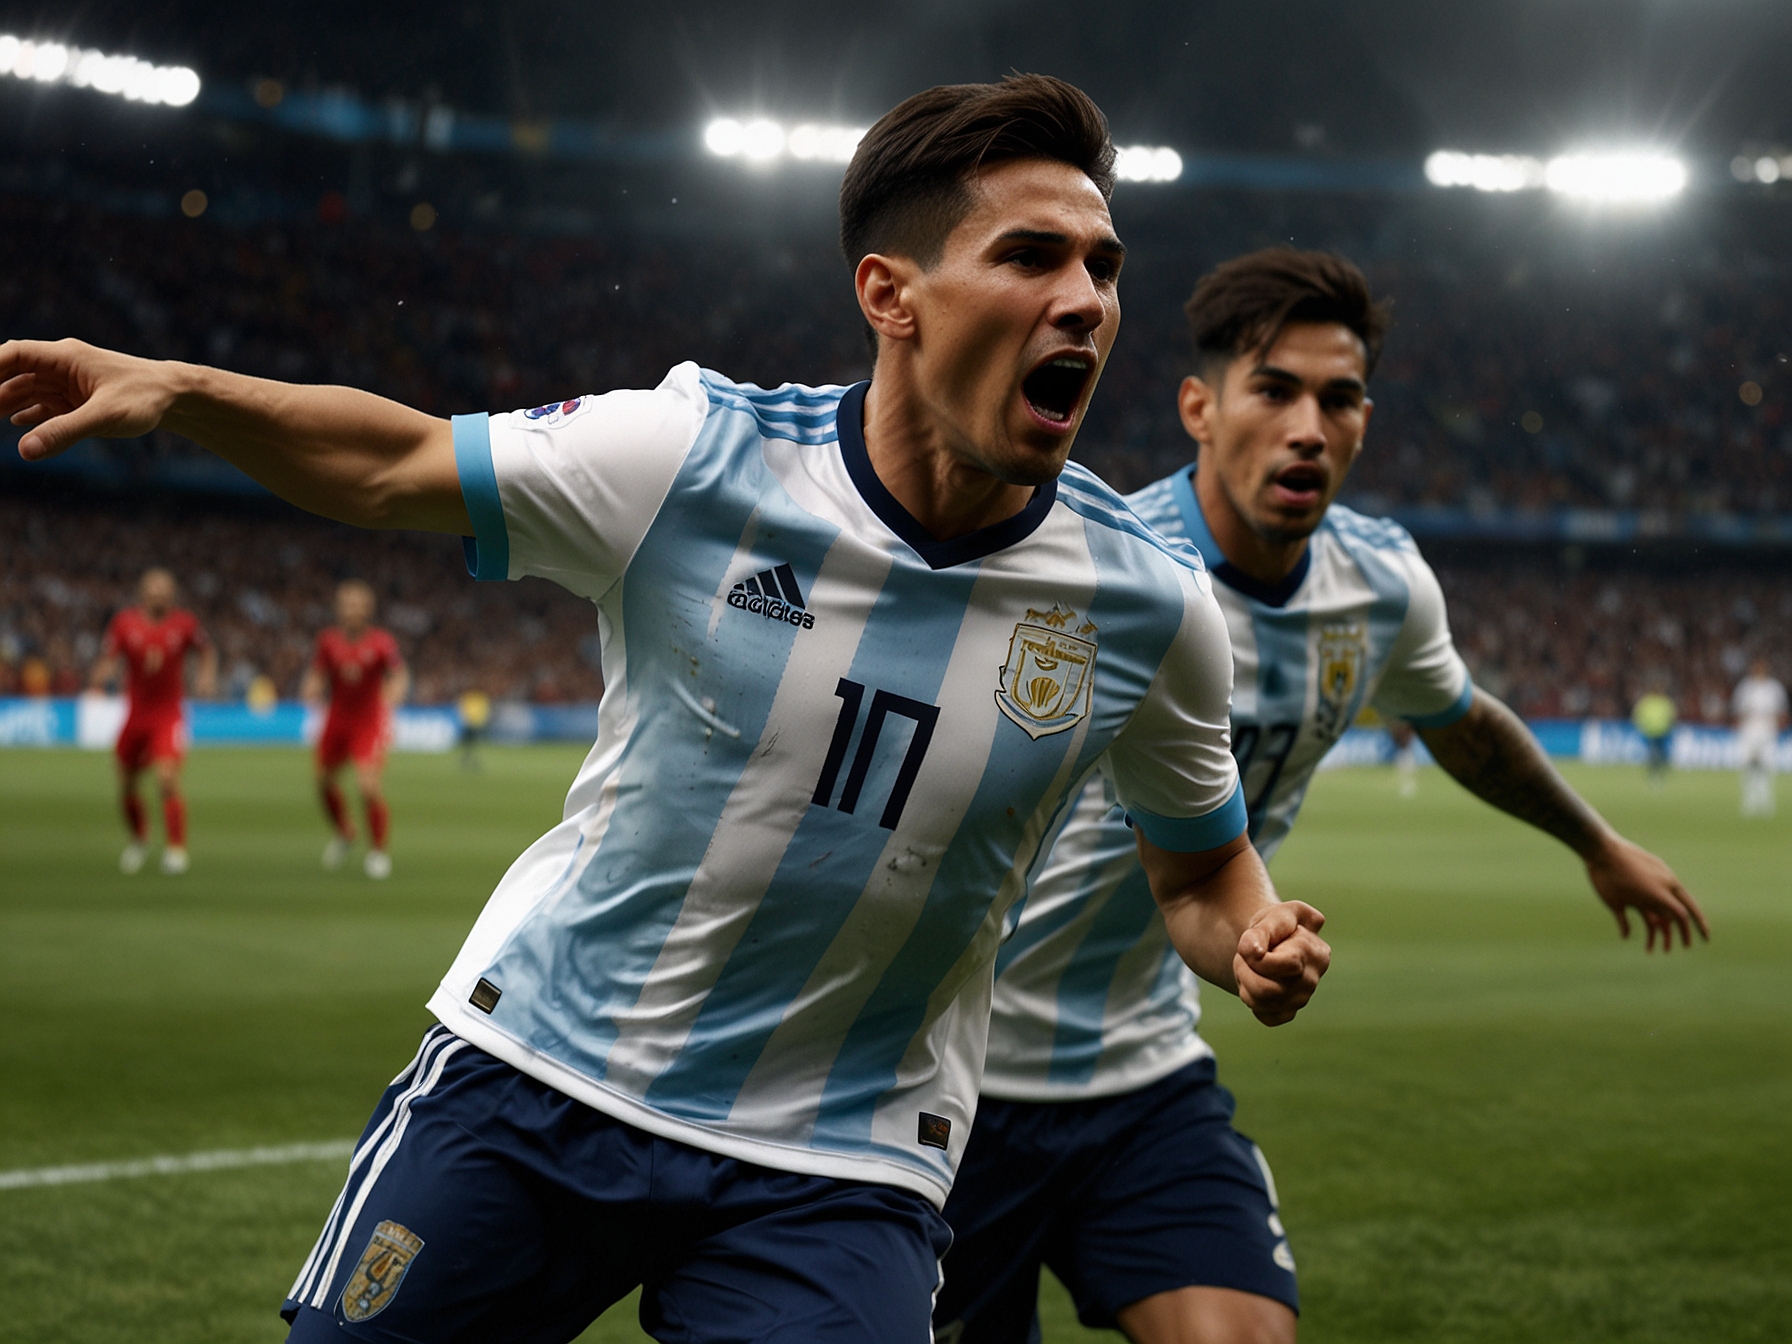 Martinez breaks through two defenders to score a crucial goal, symbolizing his newfound confidence and pivotal role in Argentina's Copa América journey despite the absence of Lionel Messi.